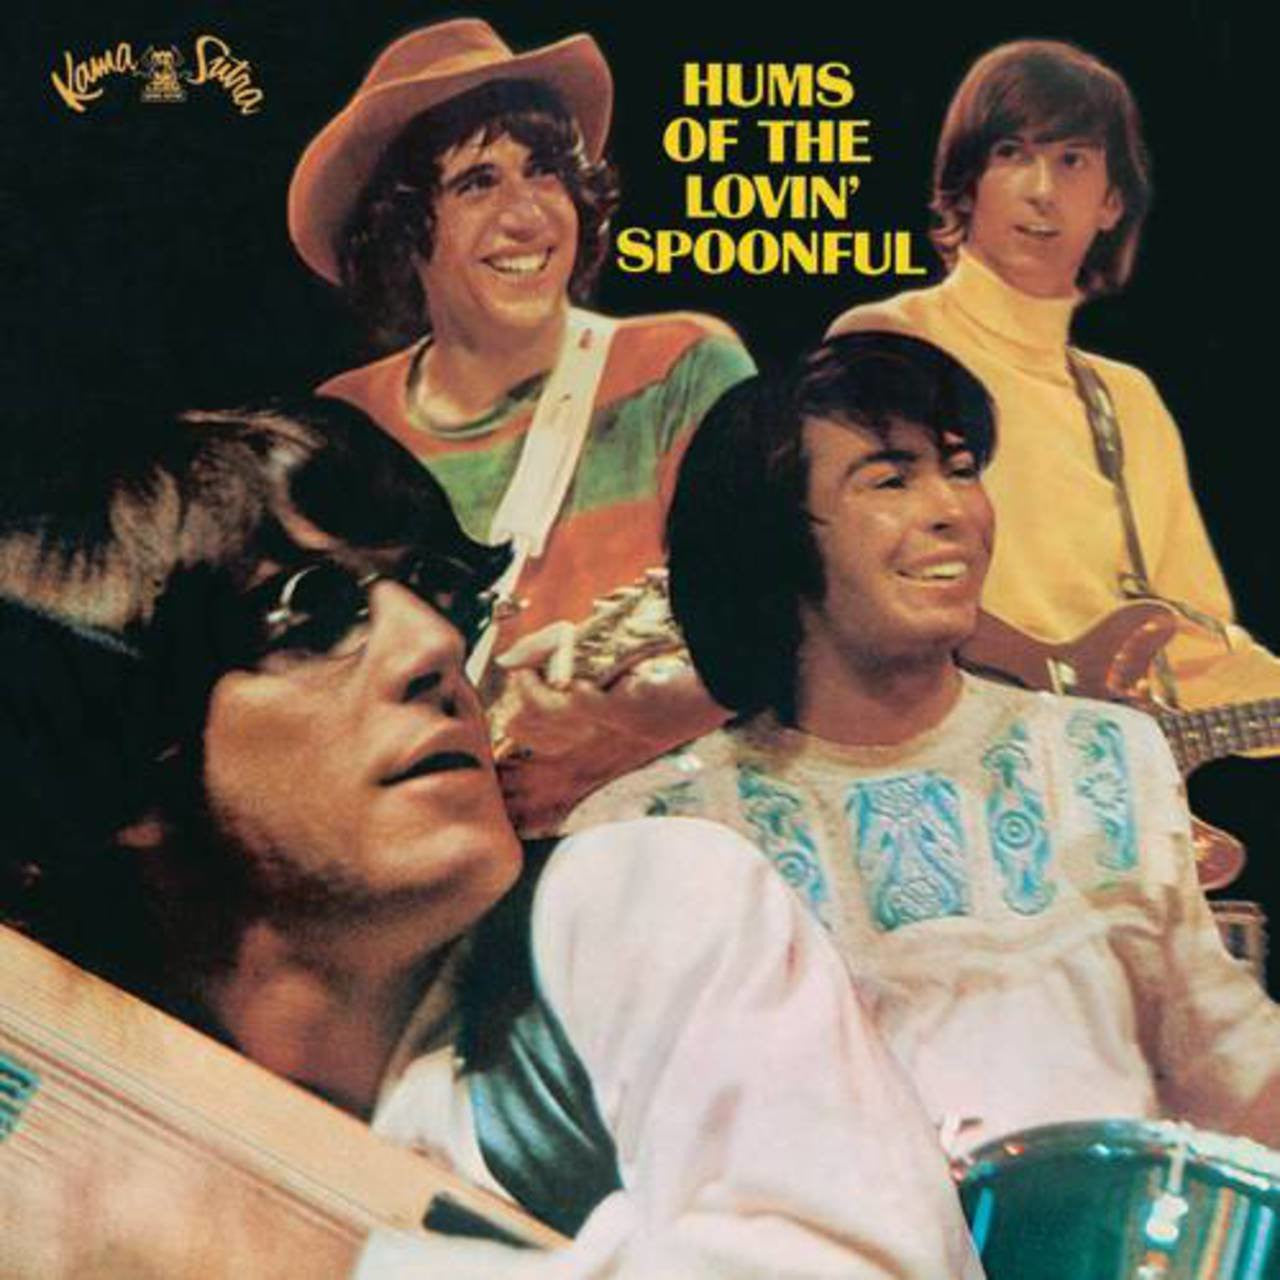 THE LOVIN' SPOONFUL 'HUMS OF THE LOVIN' SPOONFUL' LP